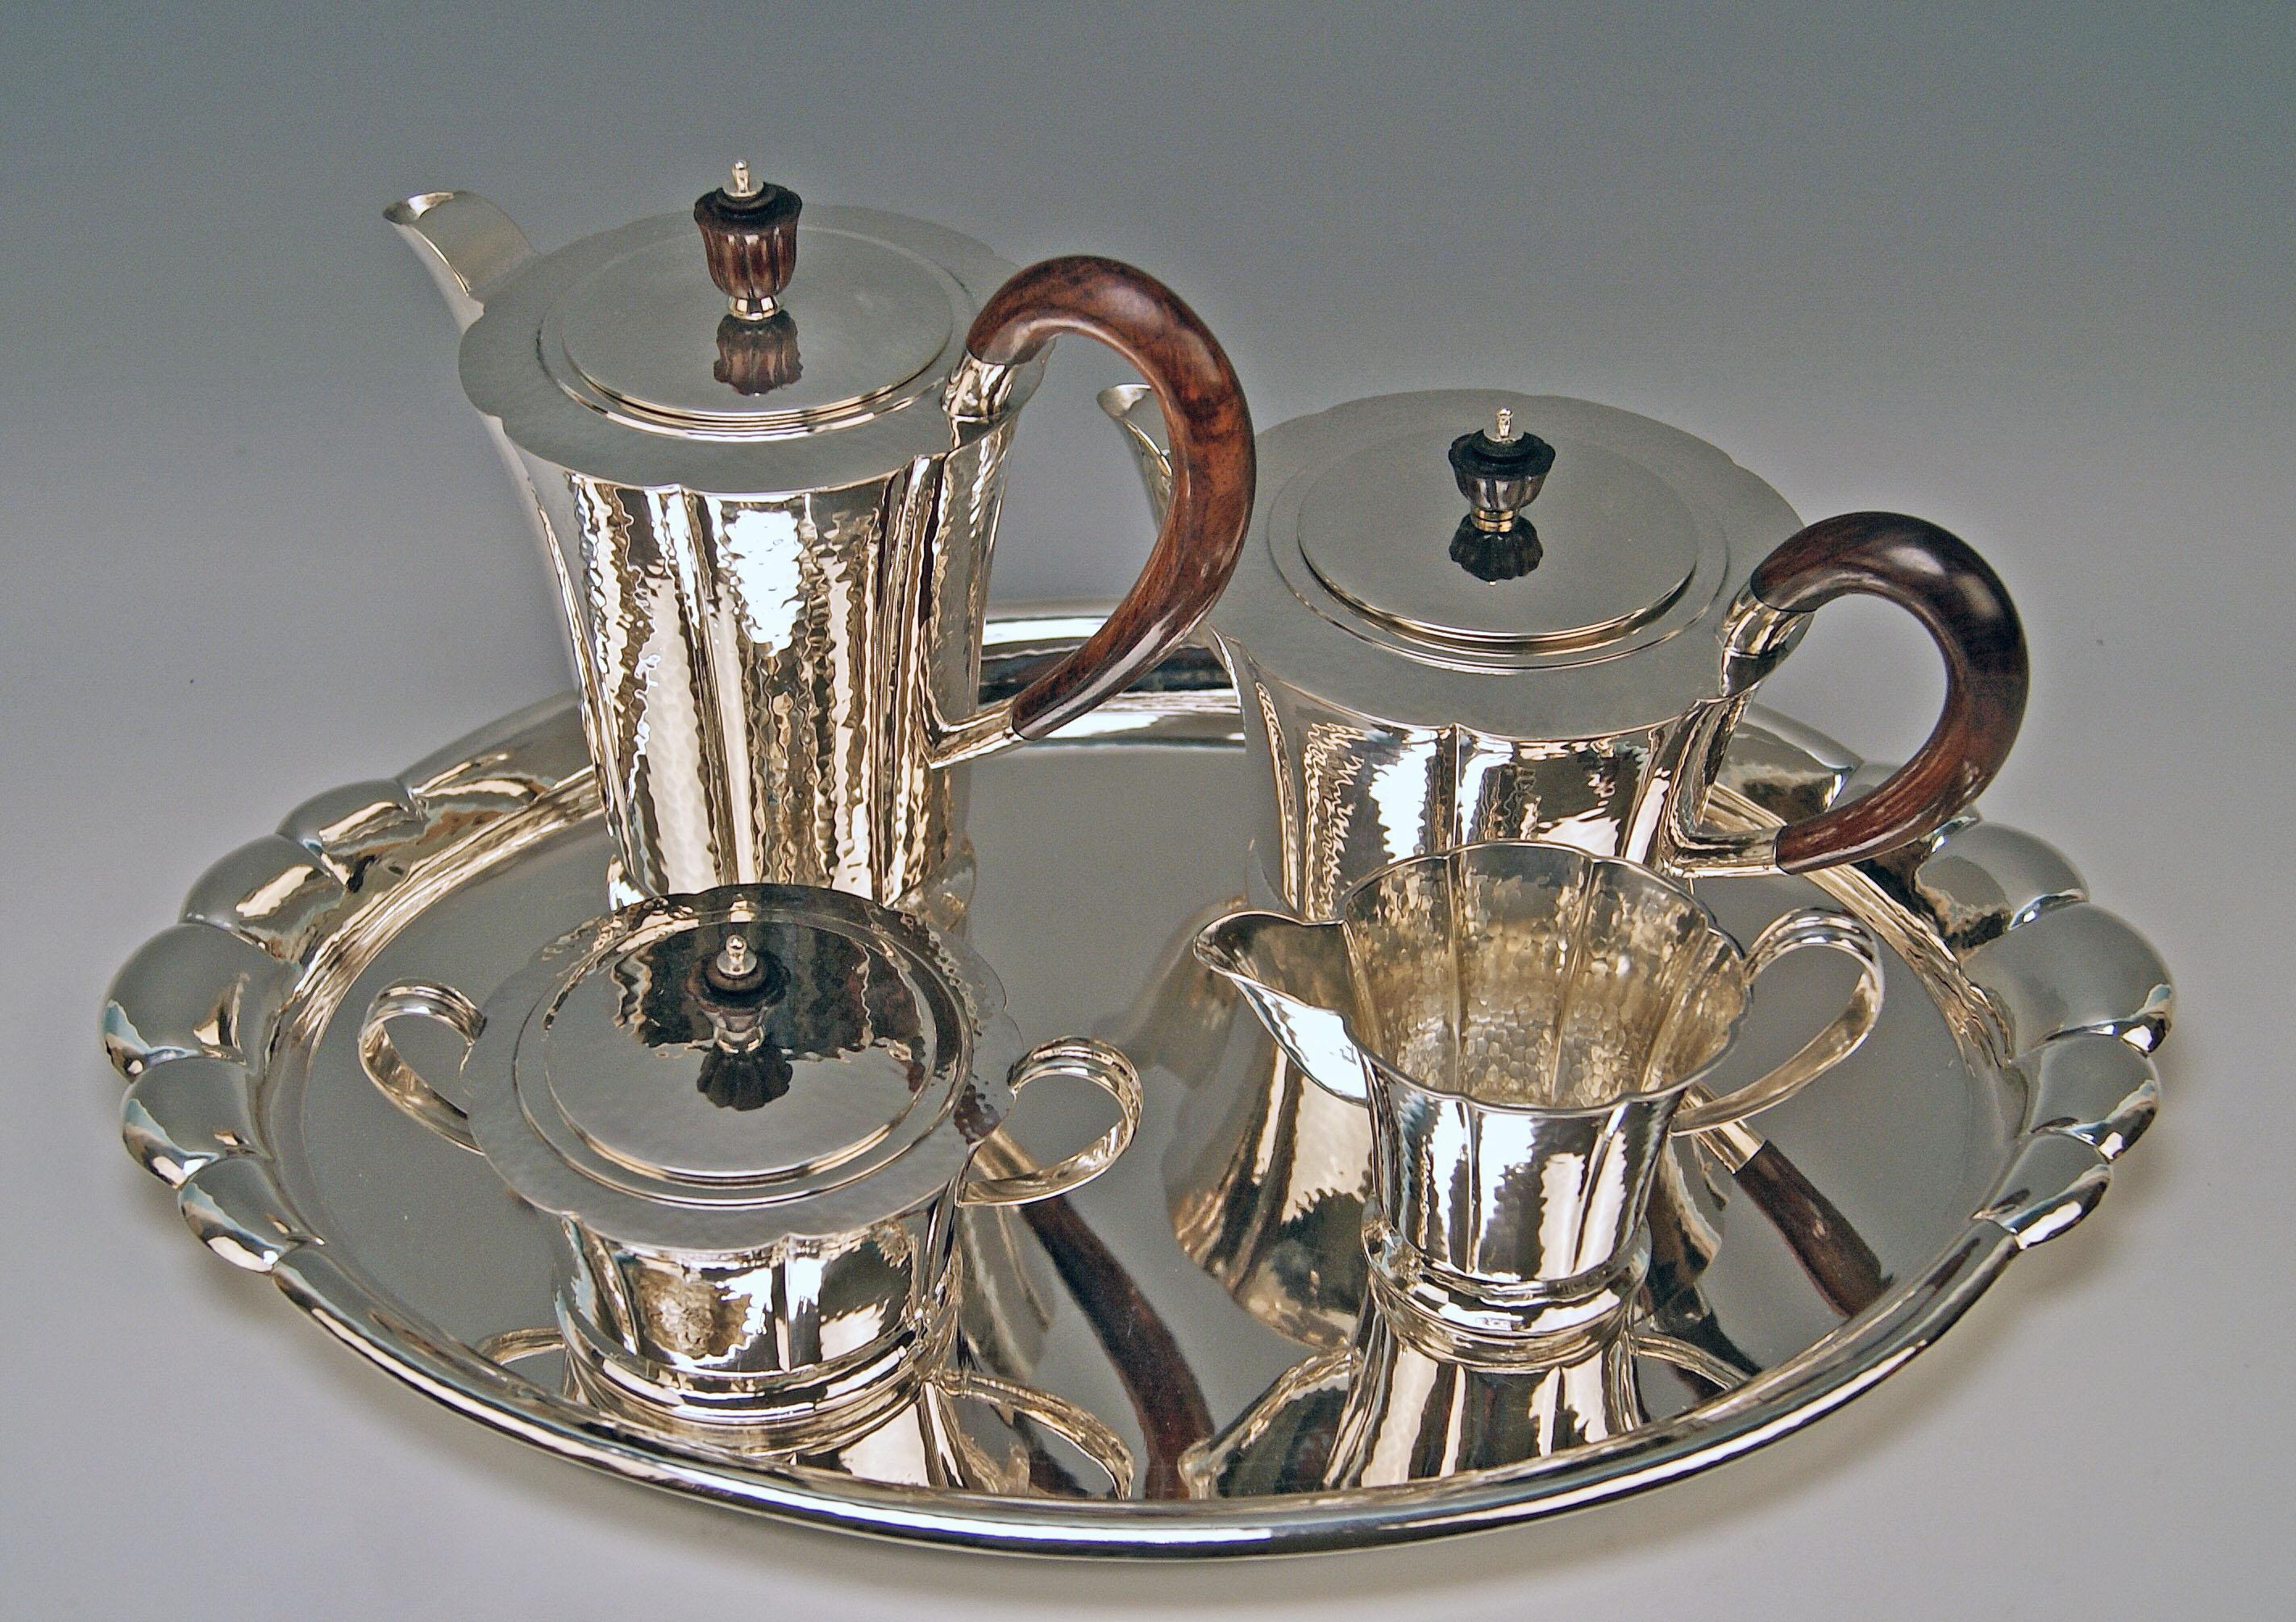 Silver stunning coffee and tea set with tray (Five Parts) made by Wilkens and Sons / Bremen, Germany 
manufactured circa 1905.

This set consists of following parts:
-- Coffee Pot
height: 8.26 inches (= 21.0 cm) handle included
width: 9.44